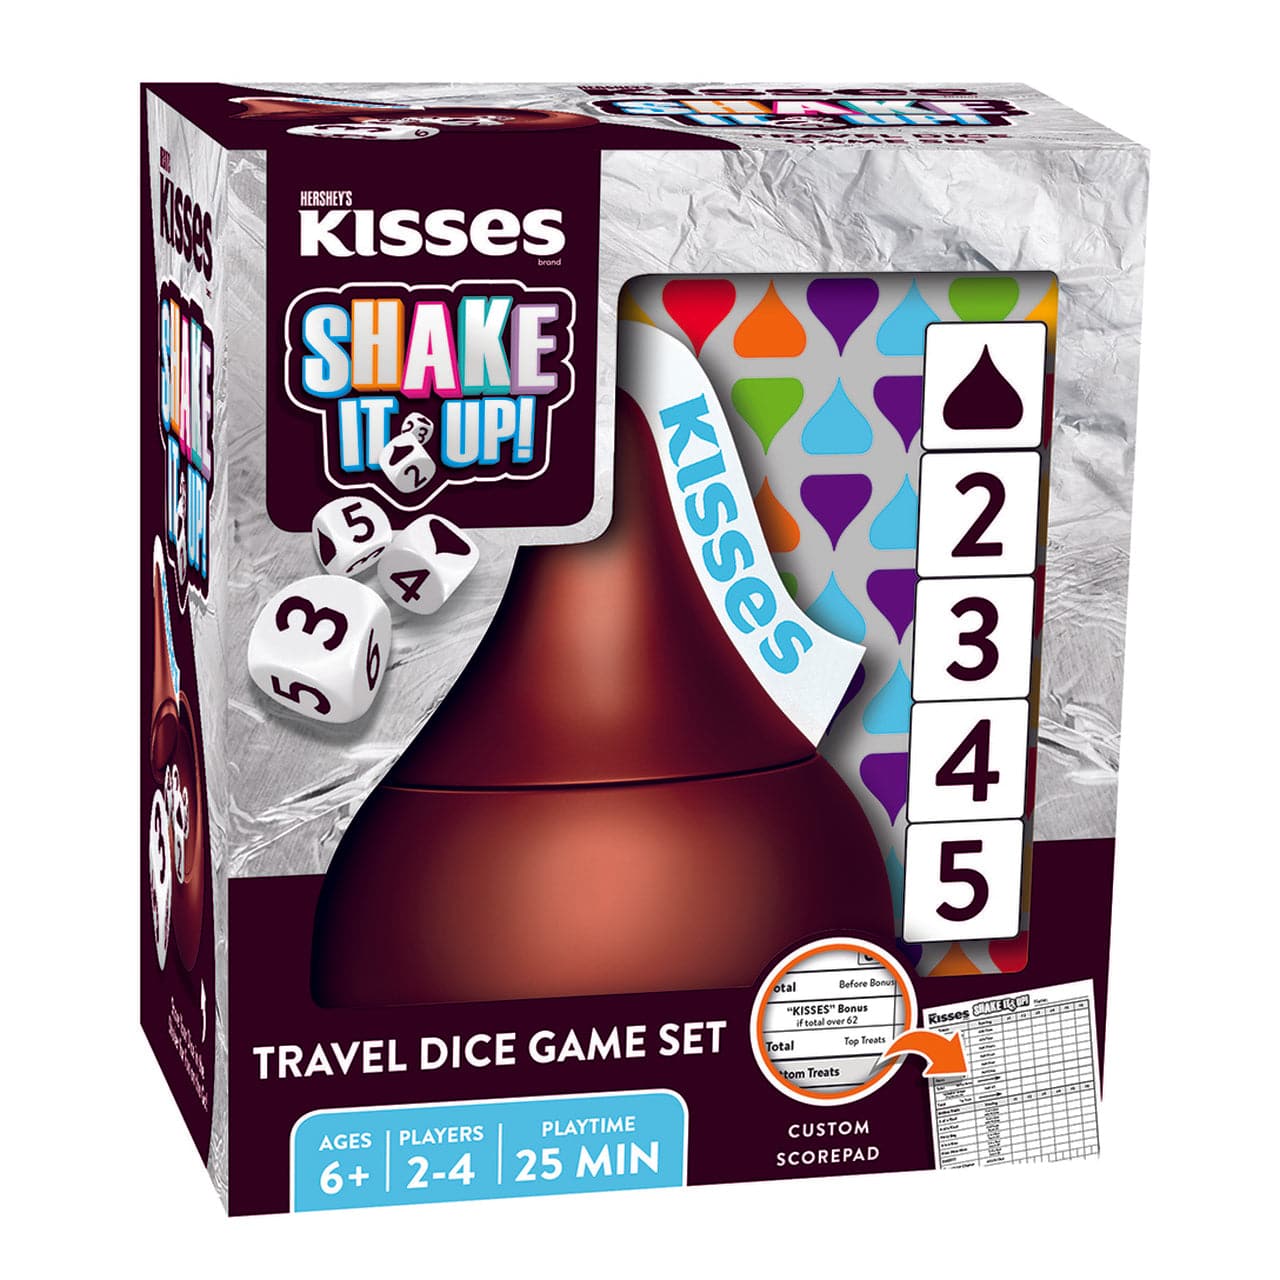 MasterPieces-Hershey's Kisses Shake it Up! Travel Dice Game-41992-Legacy Toys